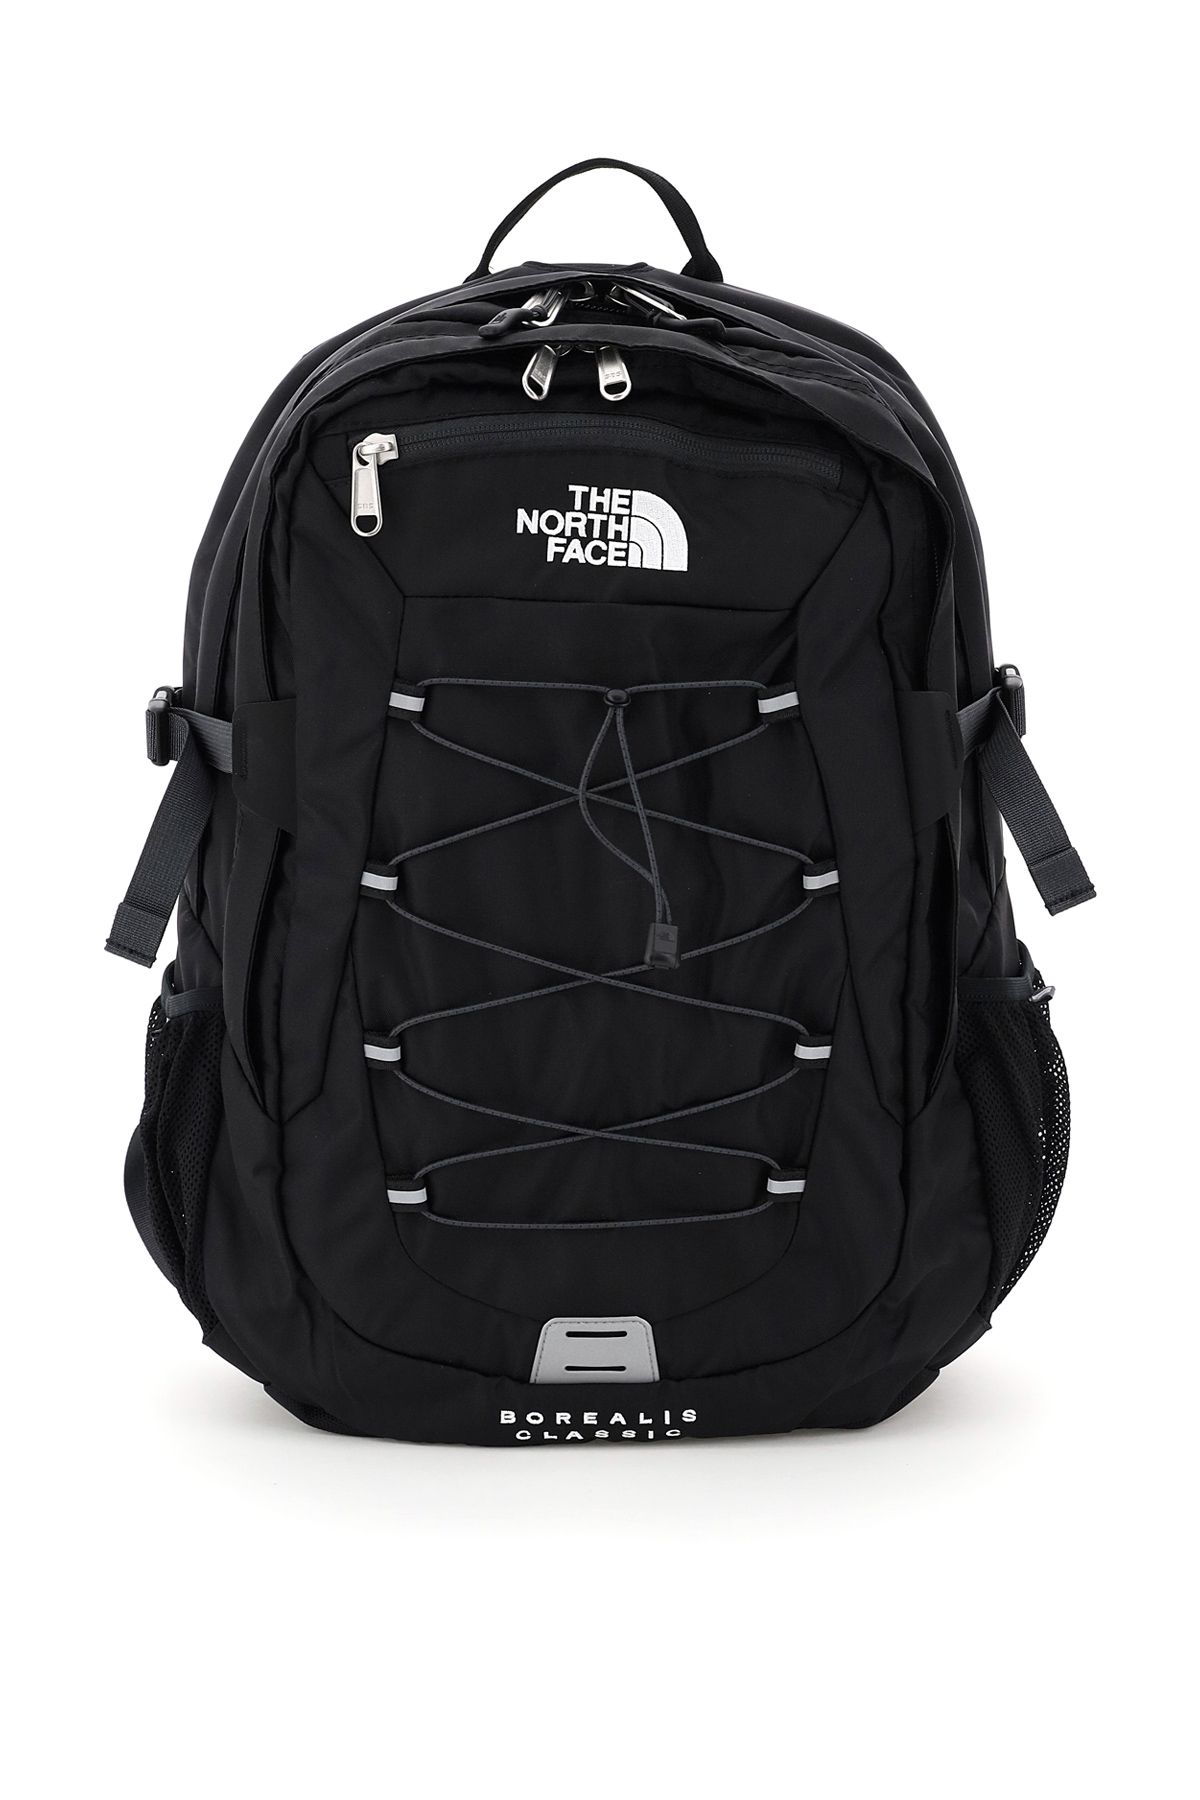 The North Face THE NORTH FACE borealis classic backpack